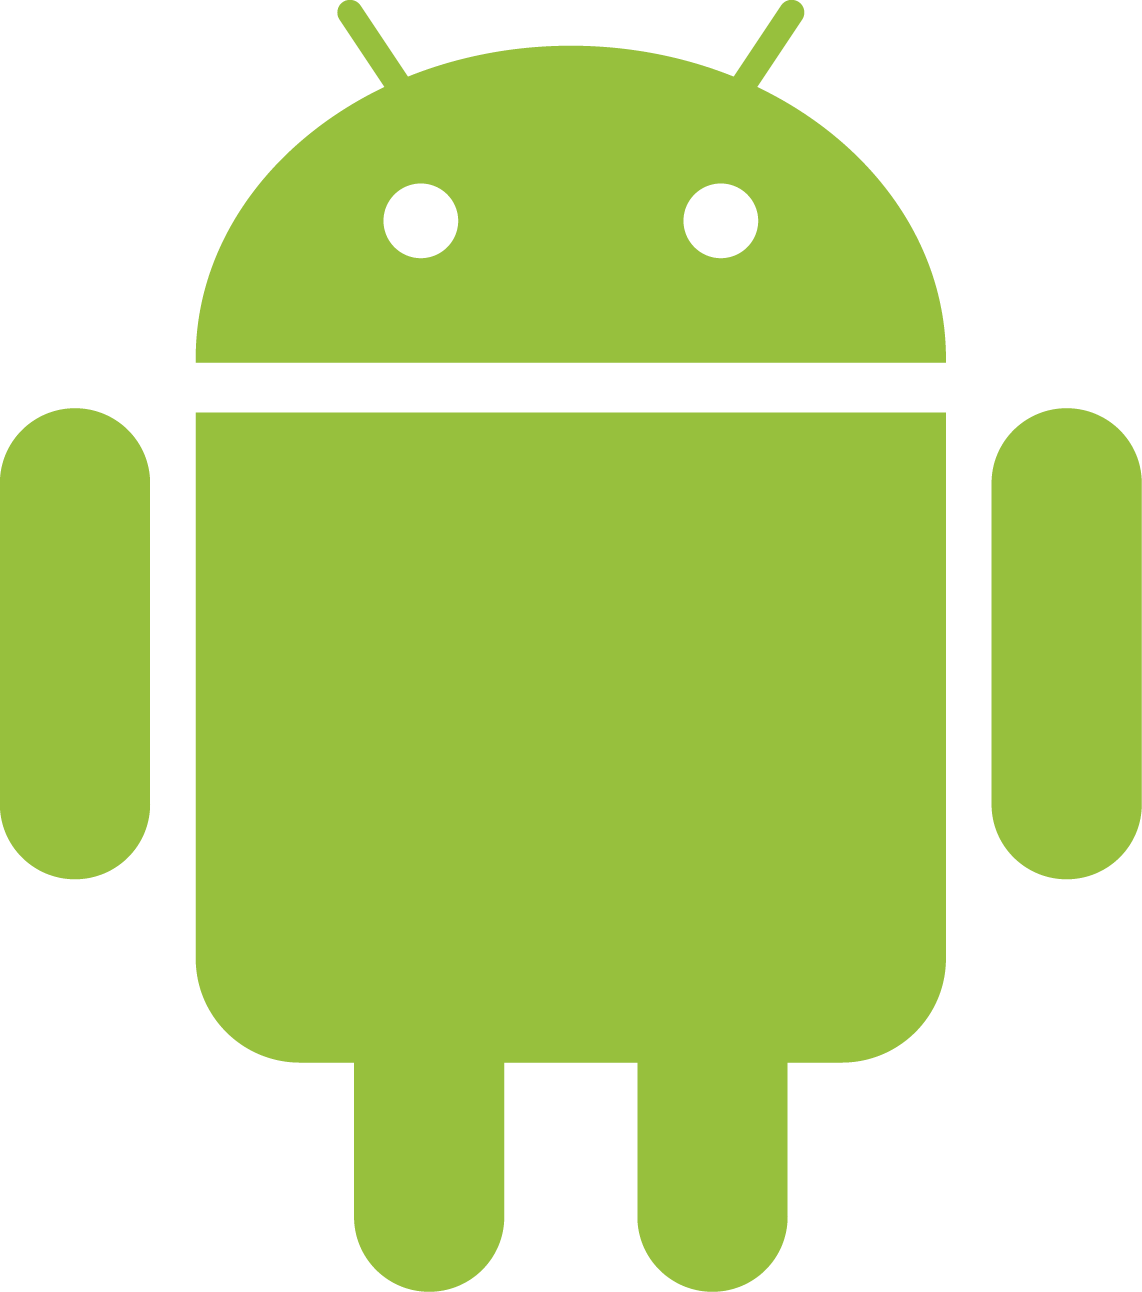 15-android-icon-symbols-images-android-vector-icon-android-app-icon